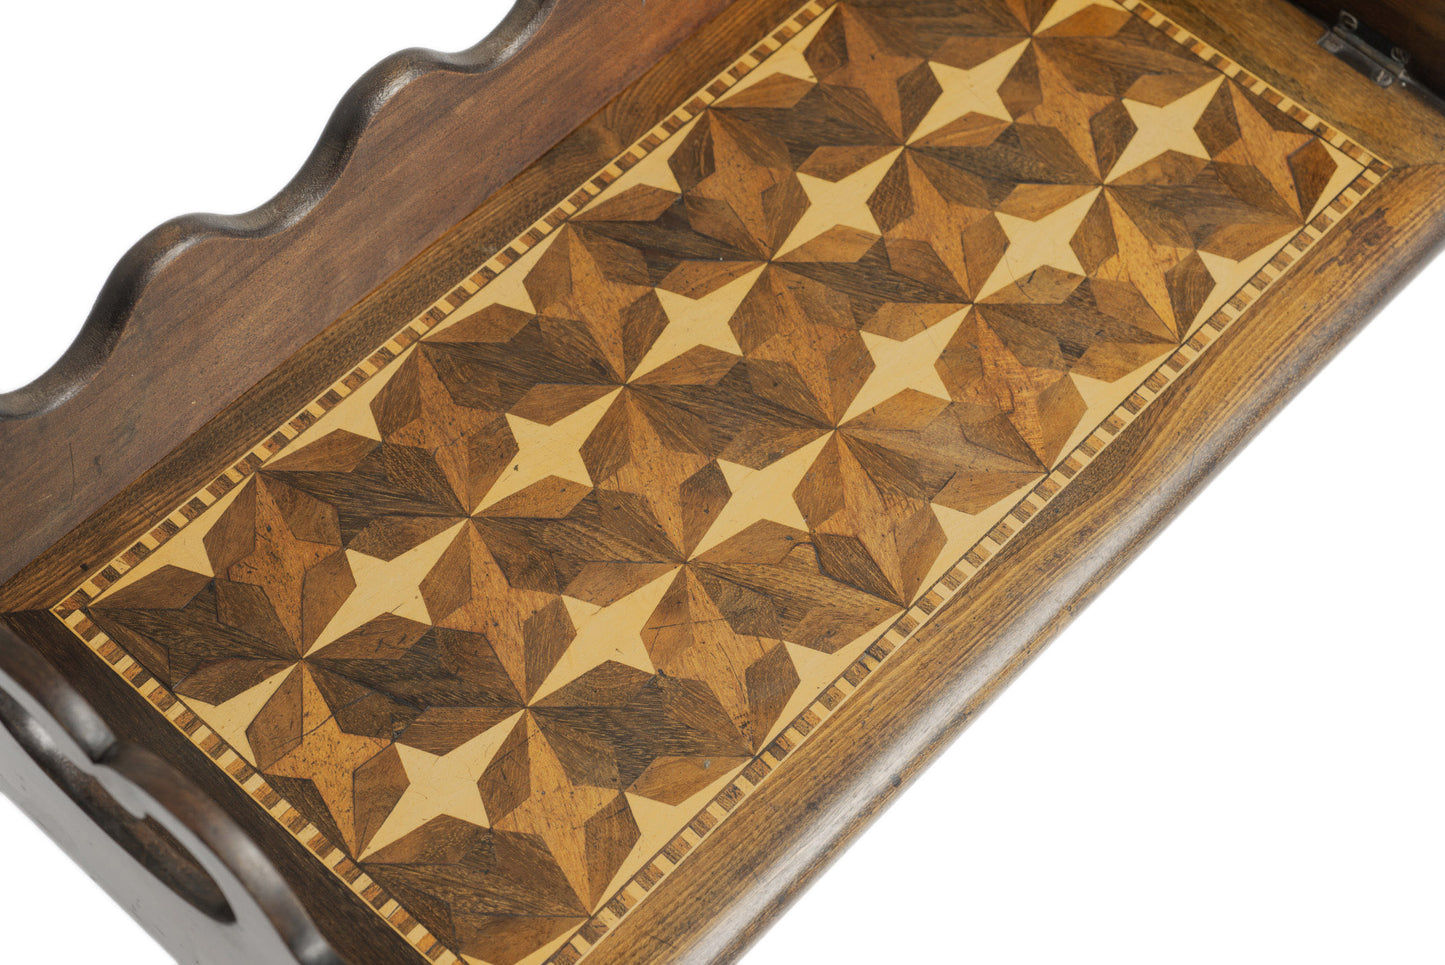 Antique Victorian Library/Study Parquetry Folding Book Tray/Carry Trough c1860 (Code 2679)